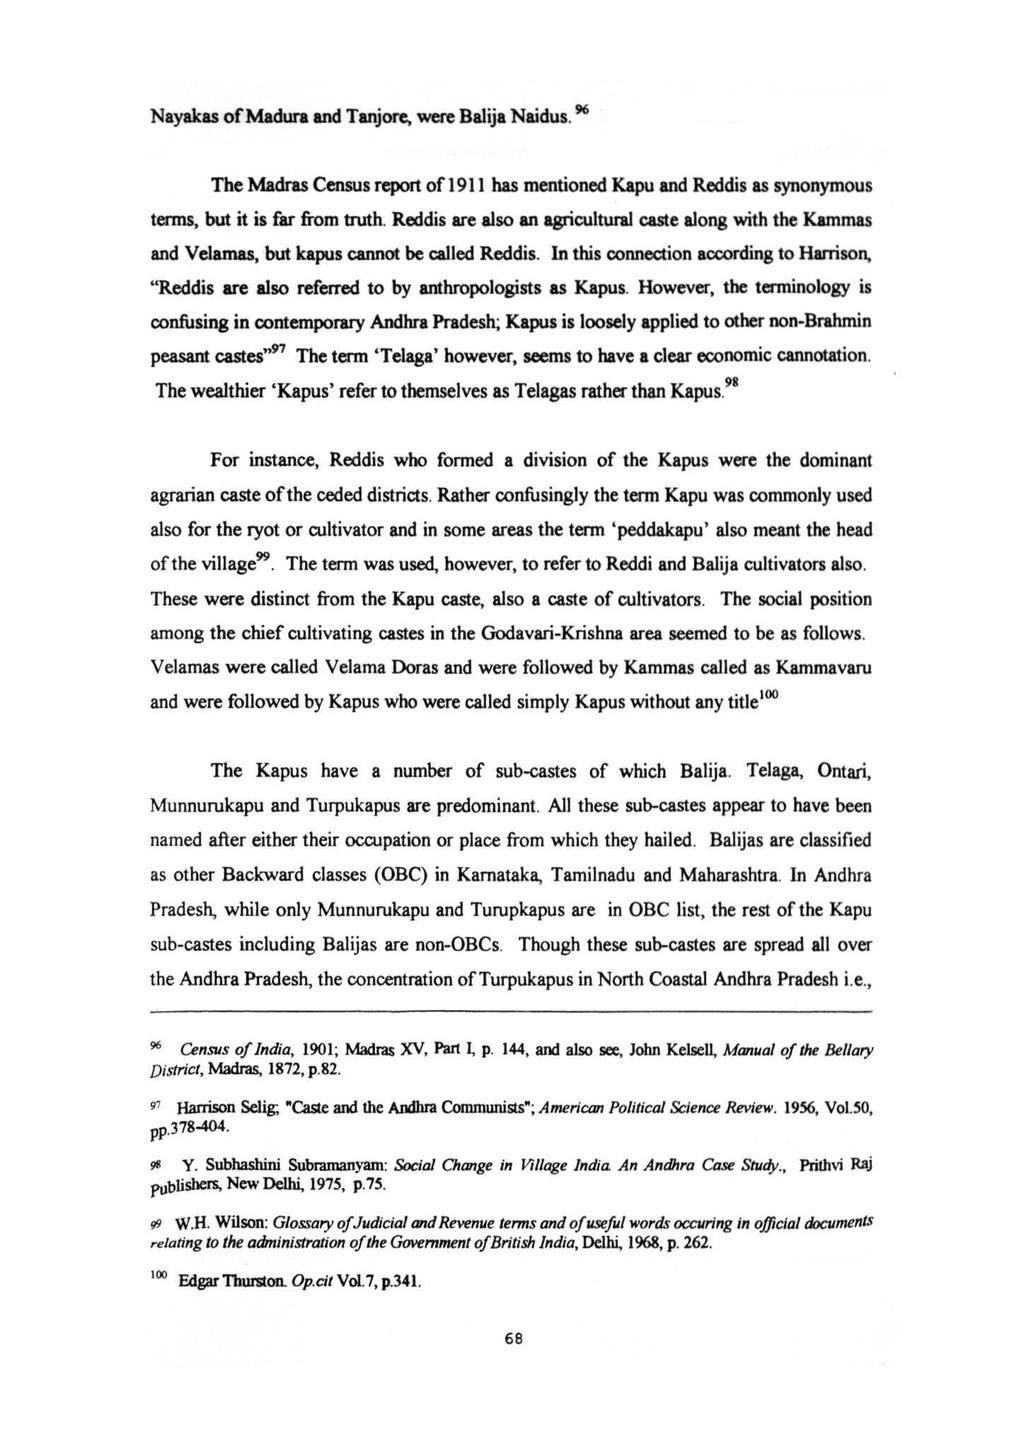 Nayakas of Madura and Tanjore, were Balija Naidus. 96 The Madras Census report of 1911 has mentioned Kapu and Reddis as synonymous terms, but it is far from truth.